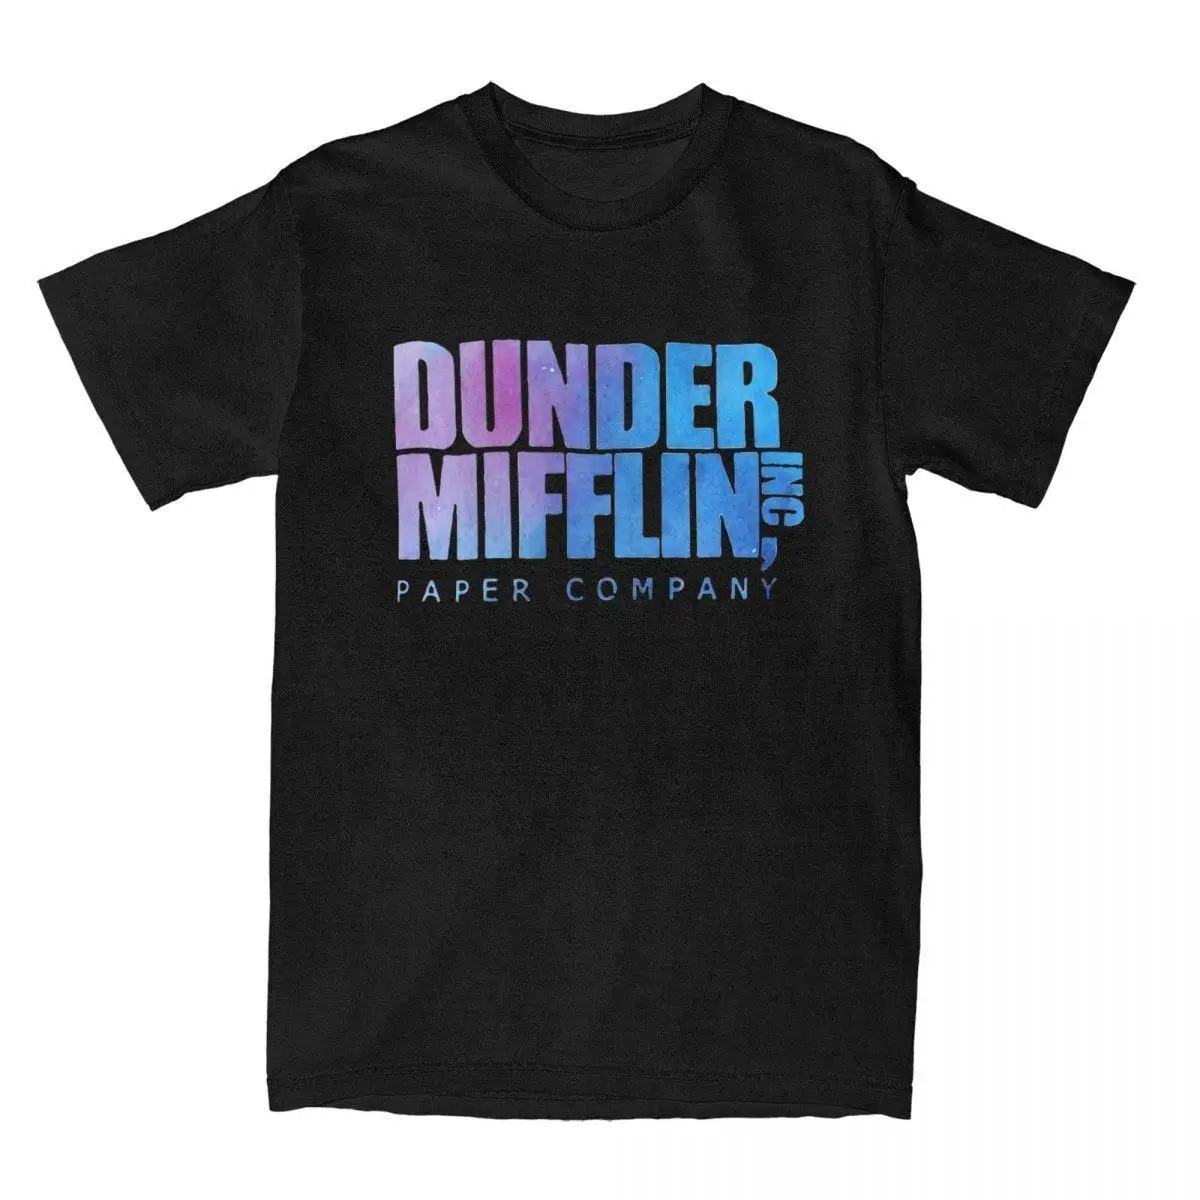 Men T-Shirt Dunder Mifflin Paper Company Inc The Office Logo Novelty Pure Cotton Tees Short Sleeve T Shirts Round Neck Clothes